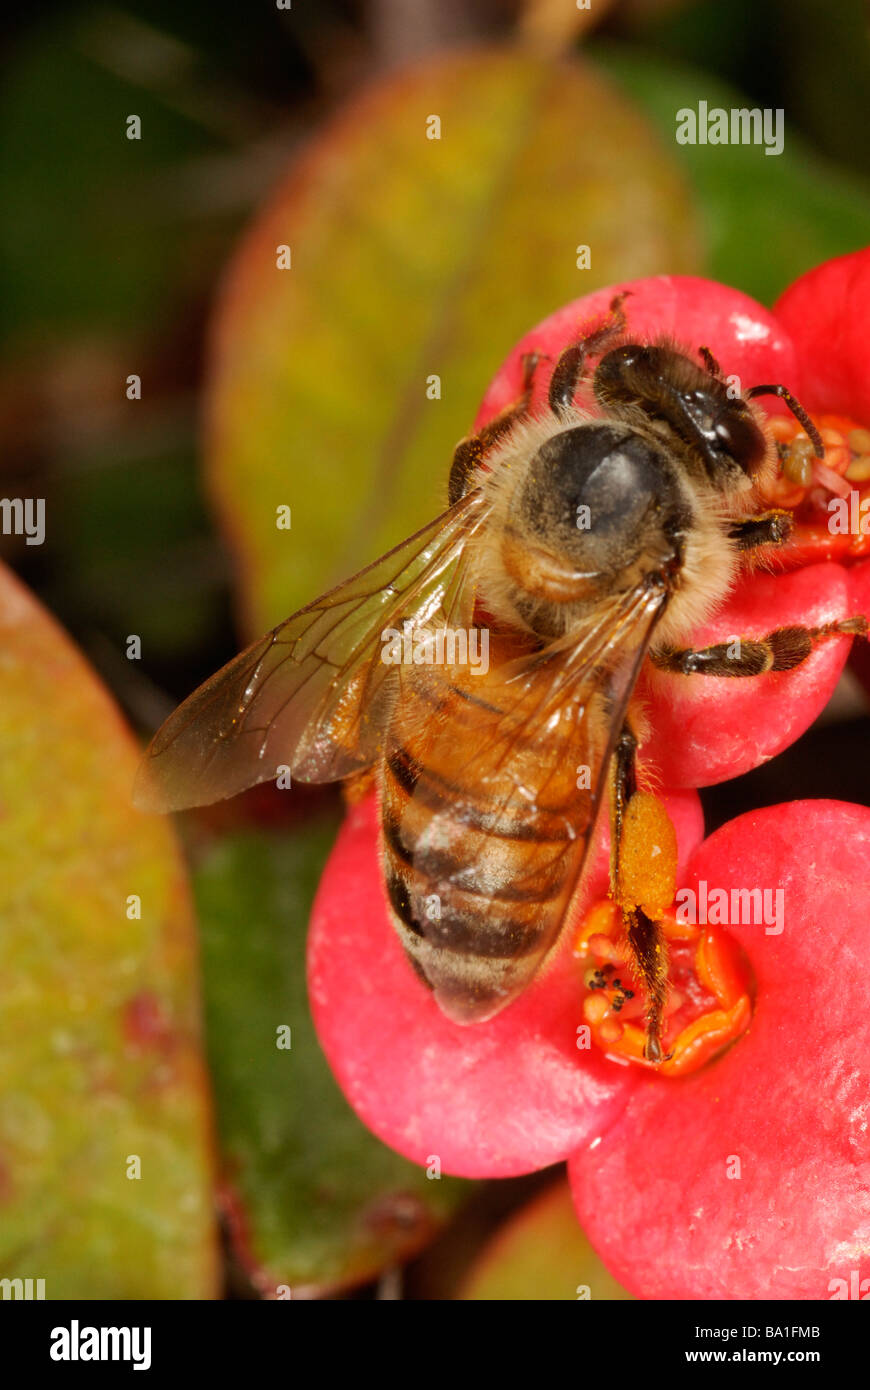 honeybee, Apis mellifera, foraging on a crown-of-thorns flower for nectar and pollen Stock Photo